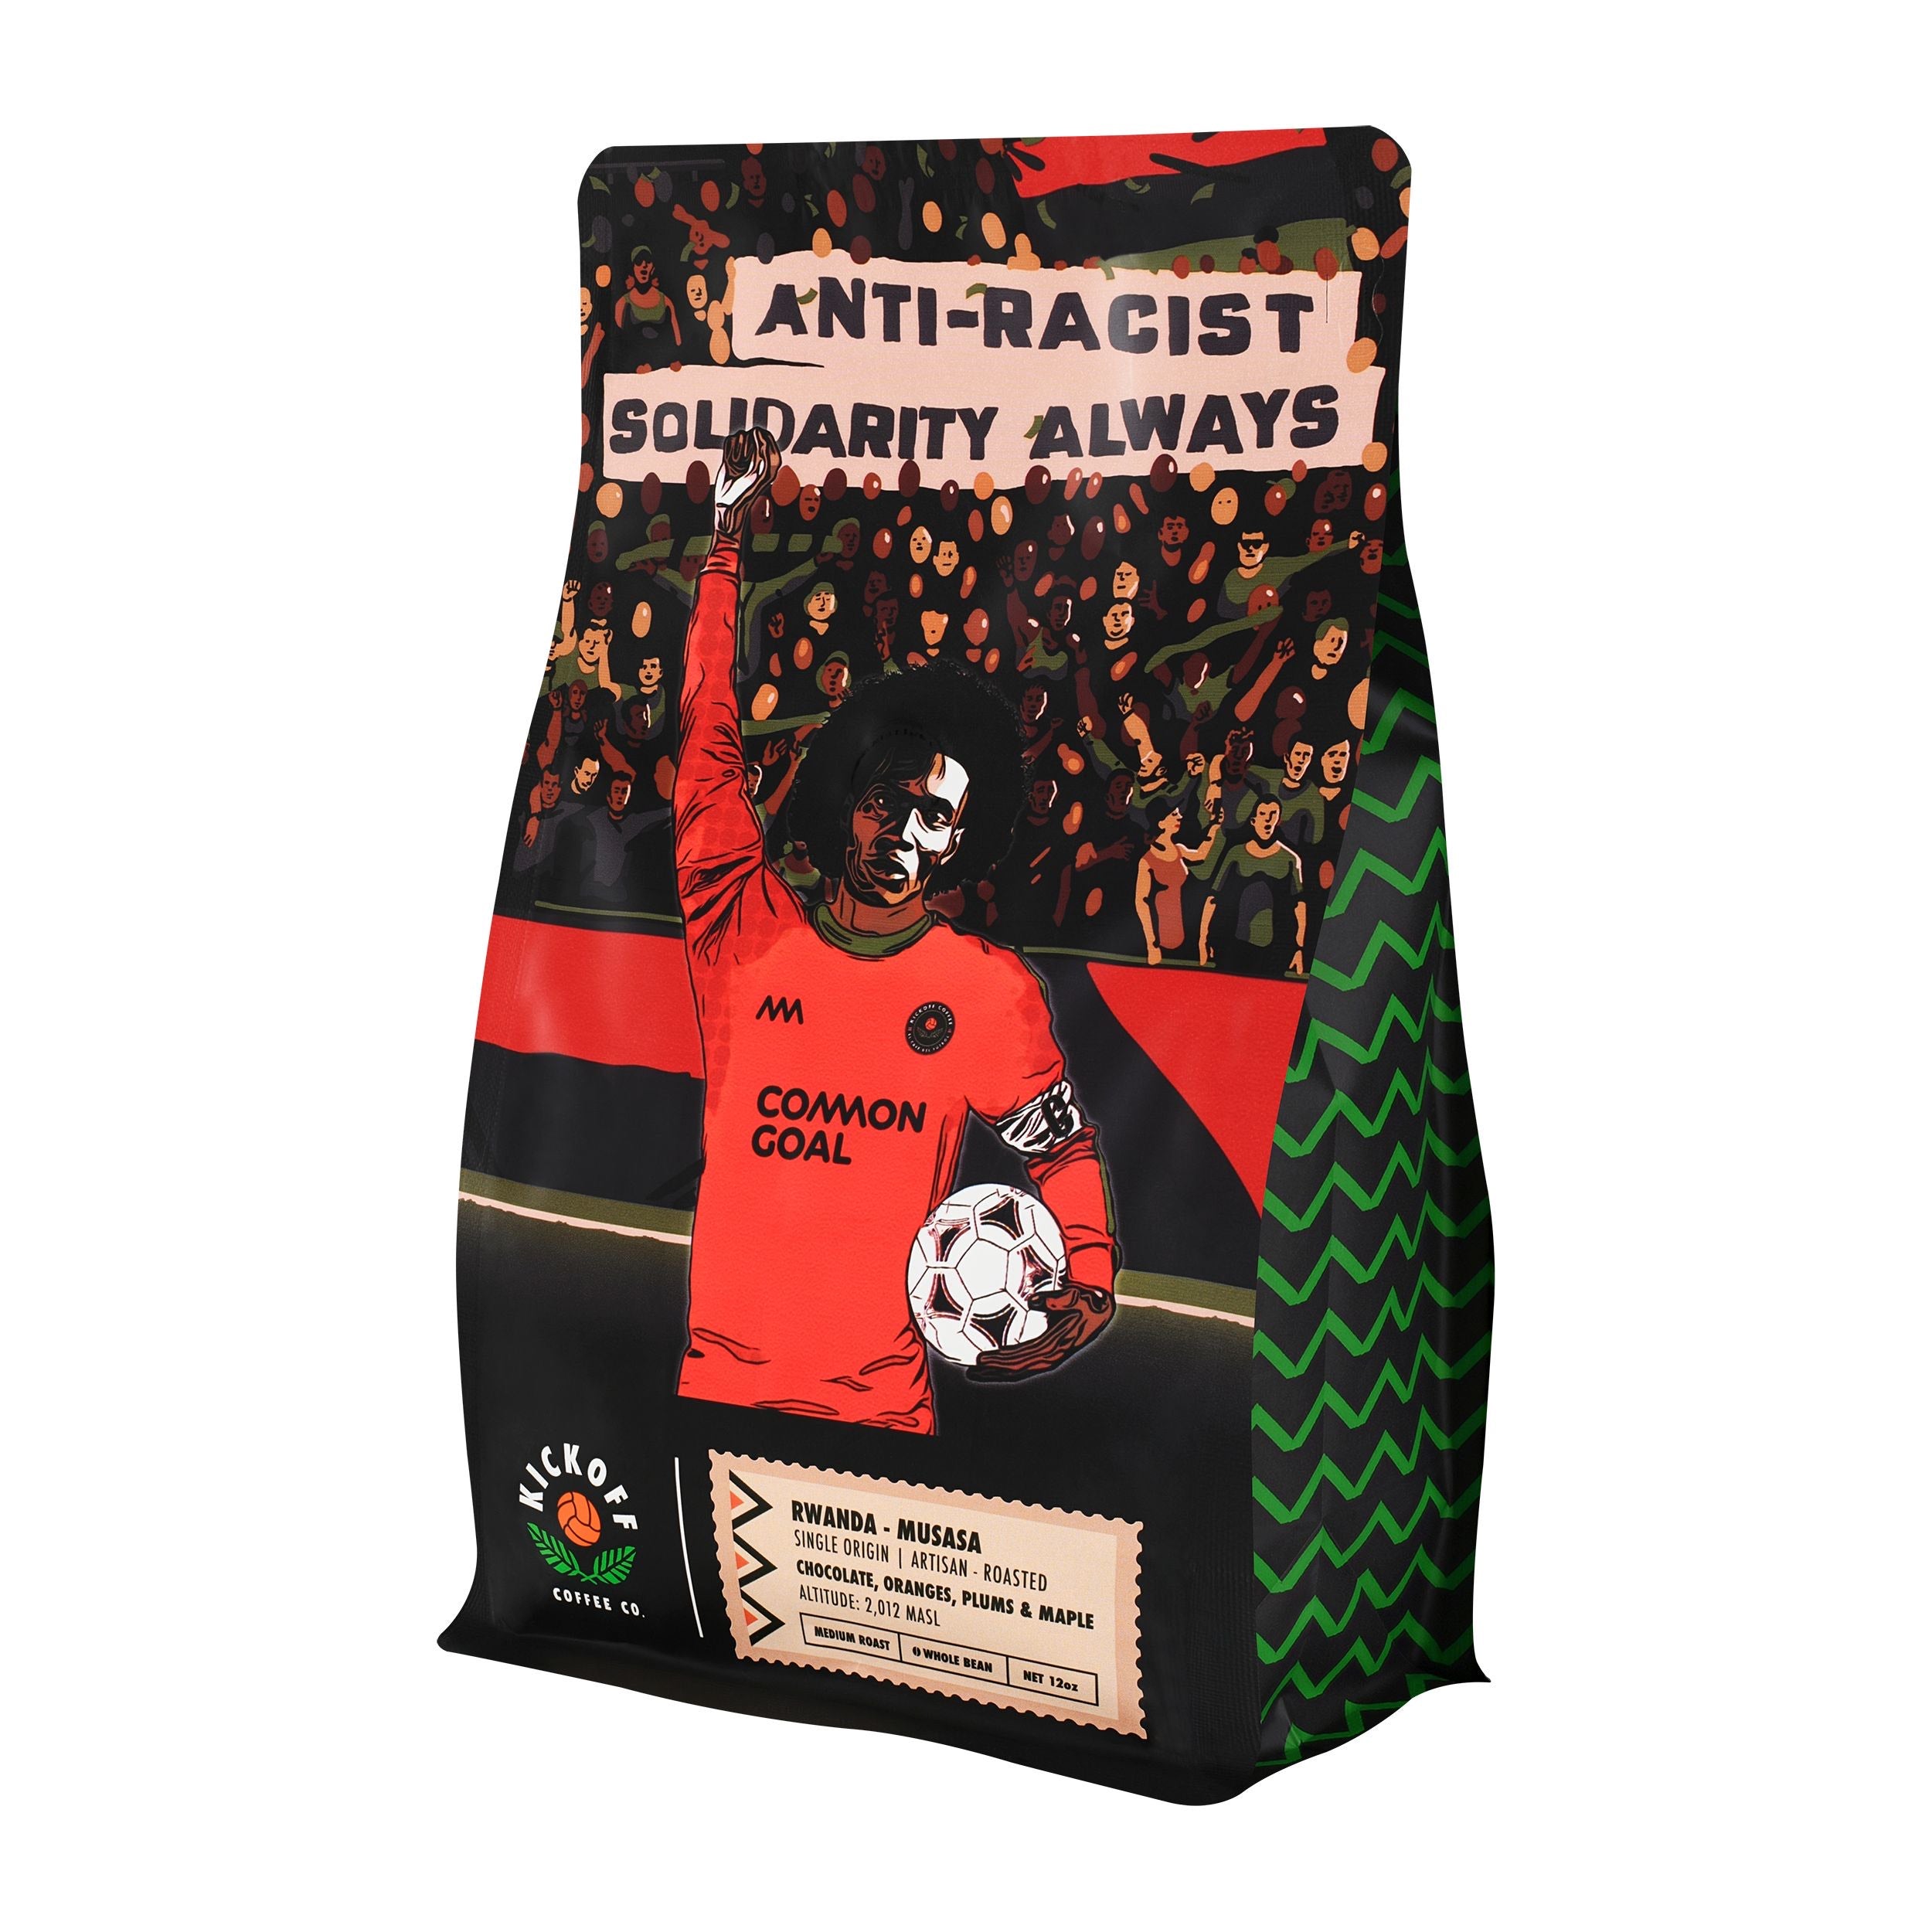 Anti Racist Solidarity Always Coffee Bag | Kickoff Coffee Co | Common Goal x Anti-Racist Project | Rwanda coffee| Soccer Coffee | Coffee for Soccer People by Soccer People | Premier League Morning Coffee #myplmorning | specialty coffee that gives back